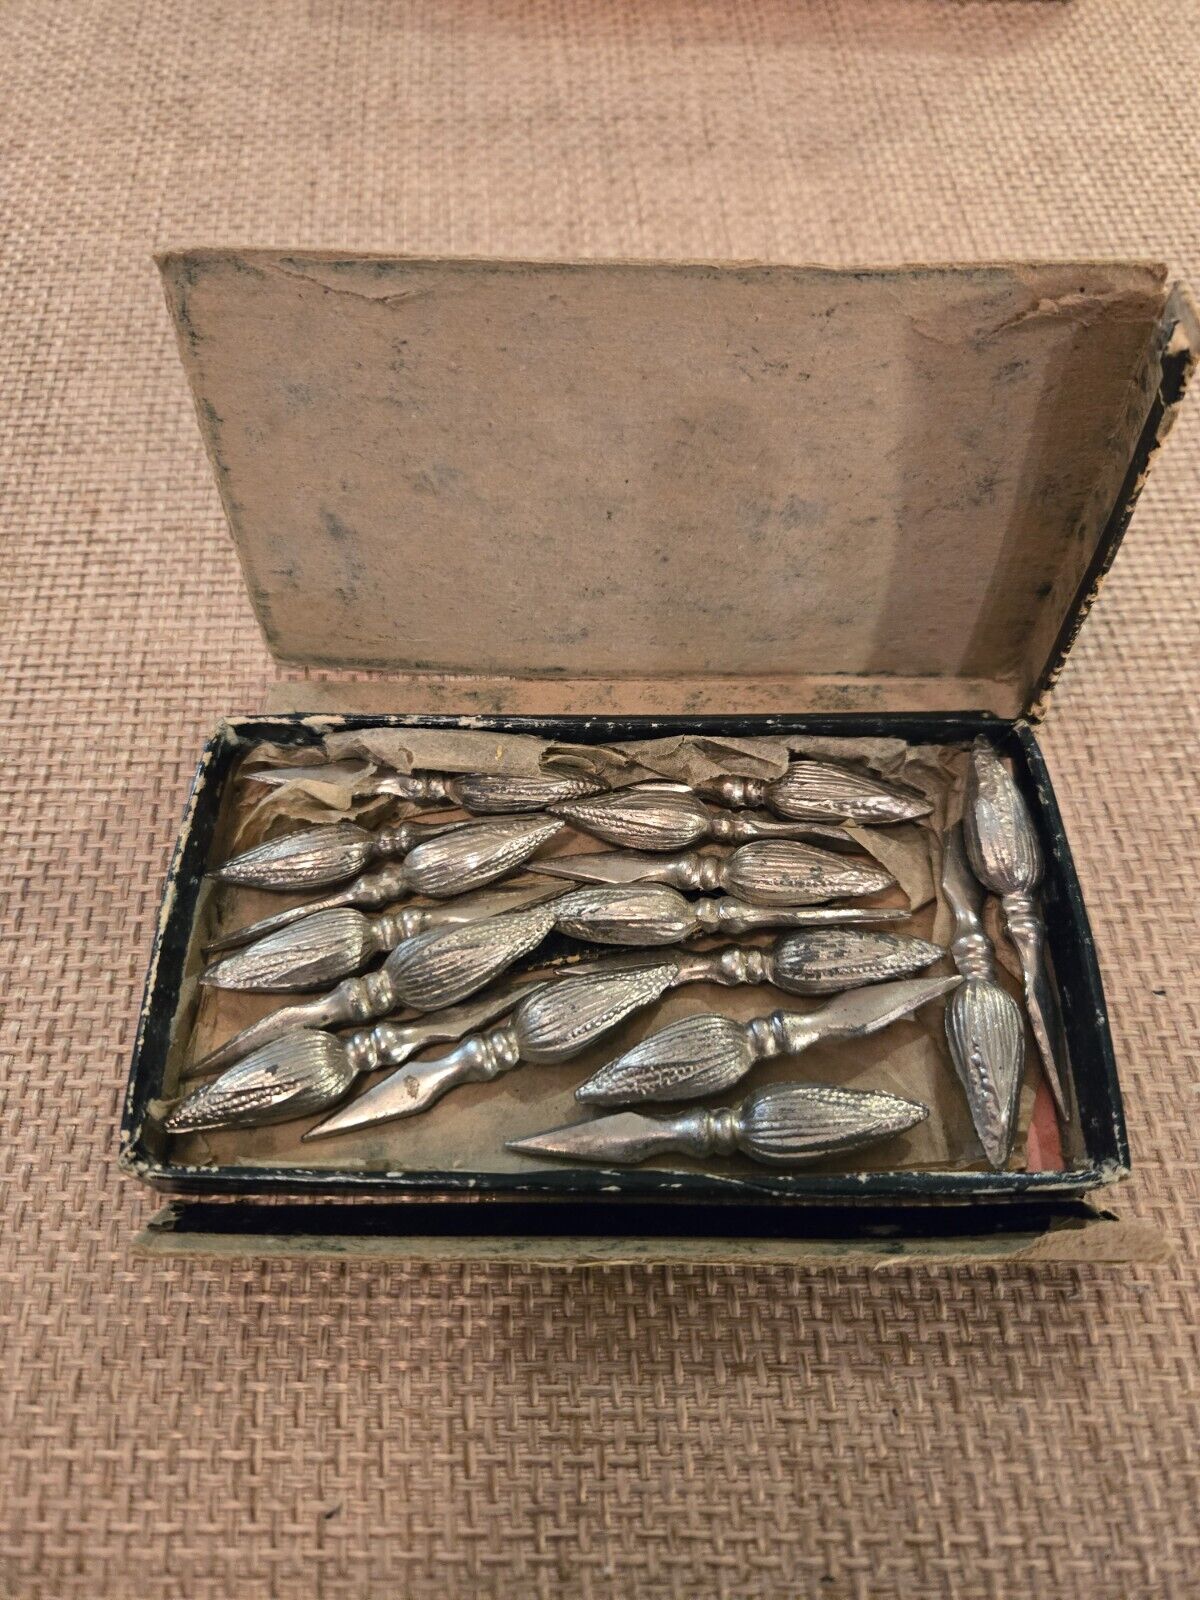 Set of 17 Vintage Silverplate Corn On The Cob Holders in Original Boxes.